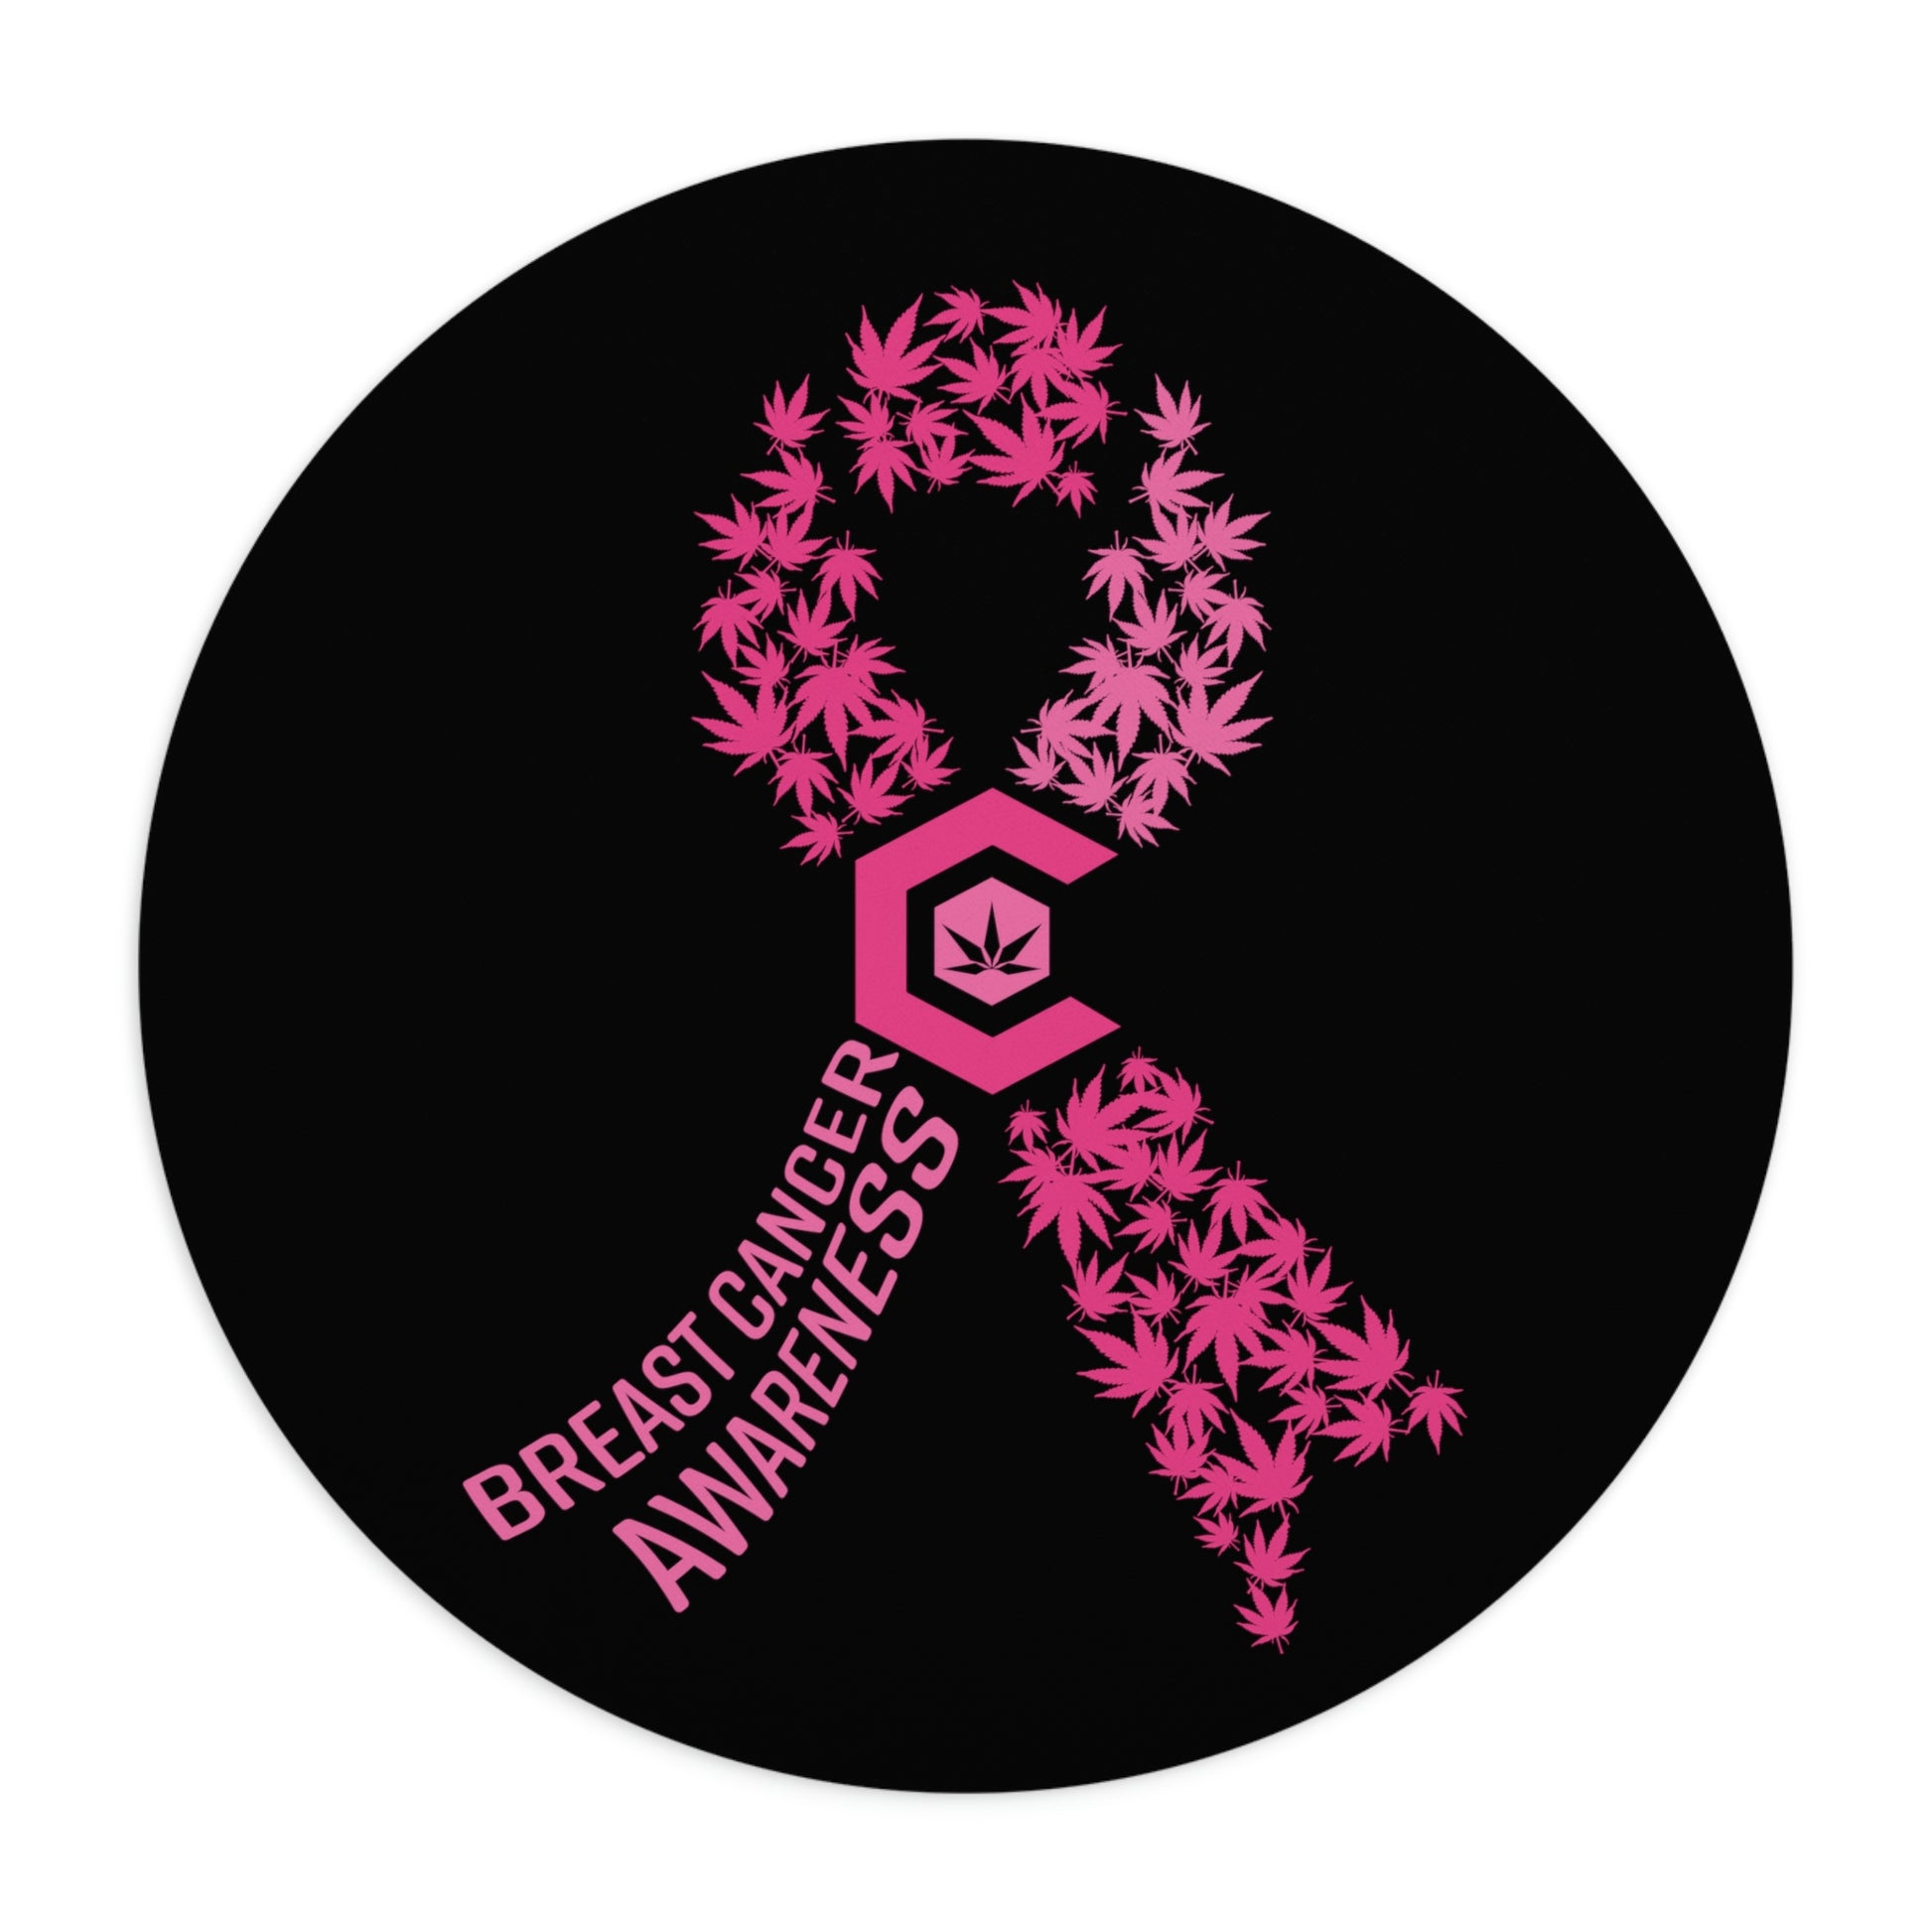 A round Breast Cancer Awareness Mouse Pad with black background.